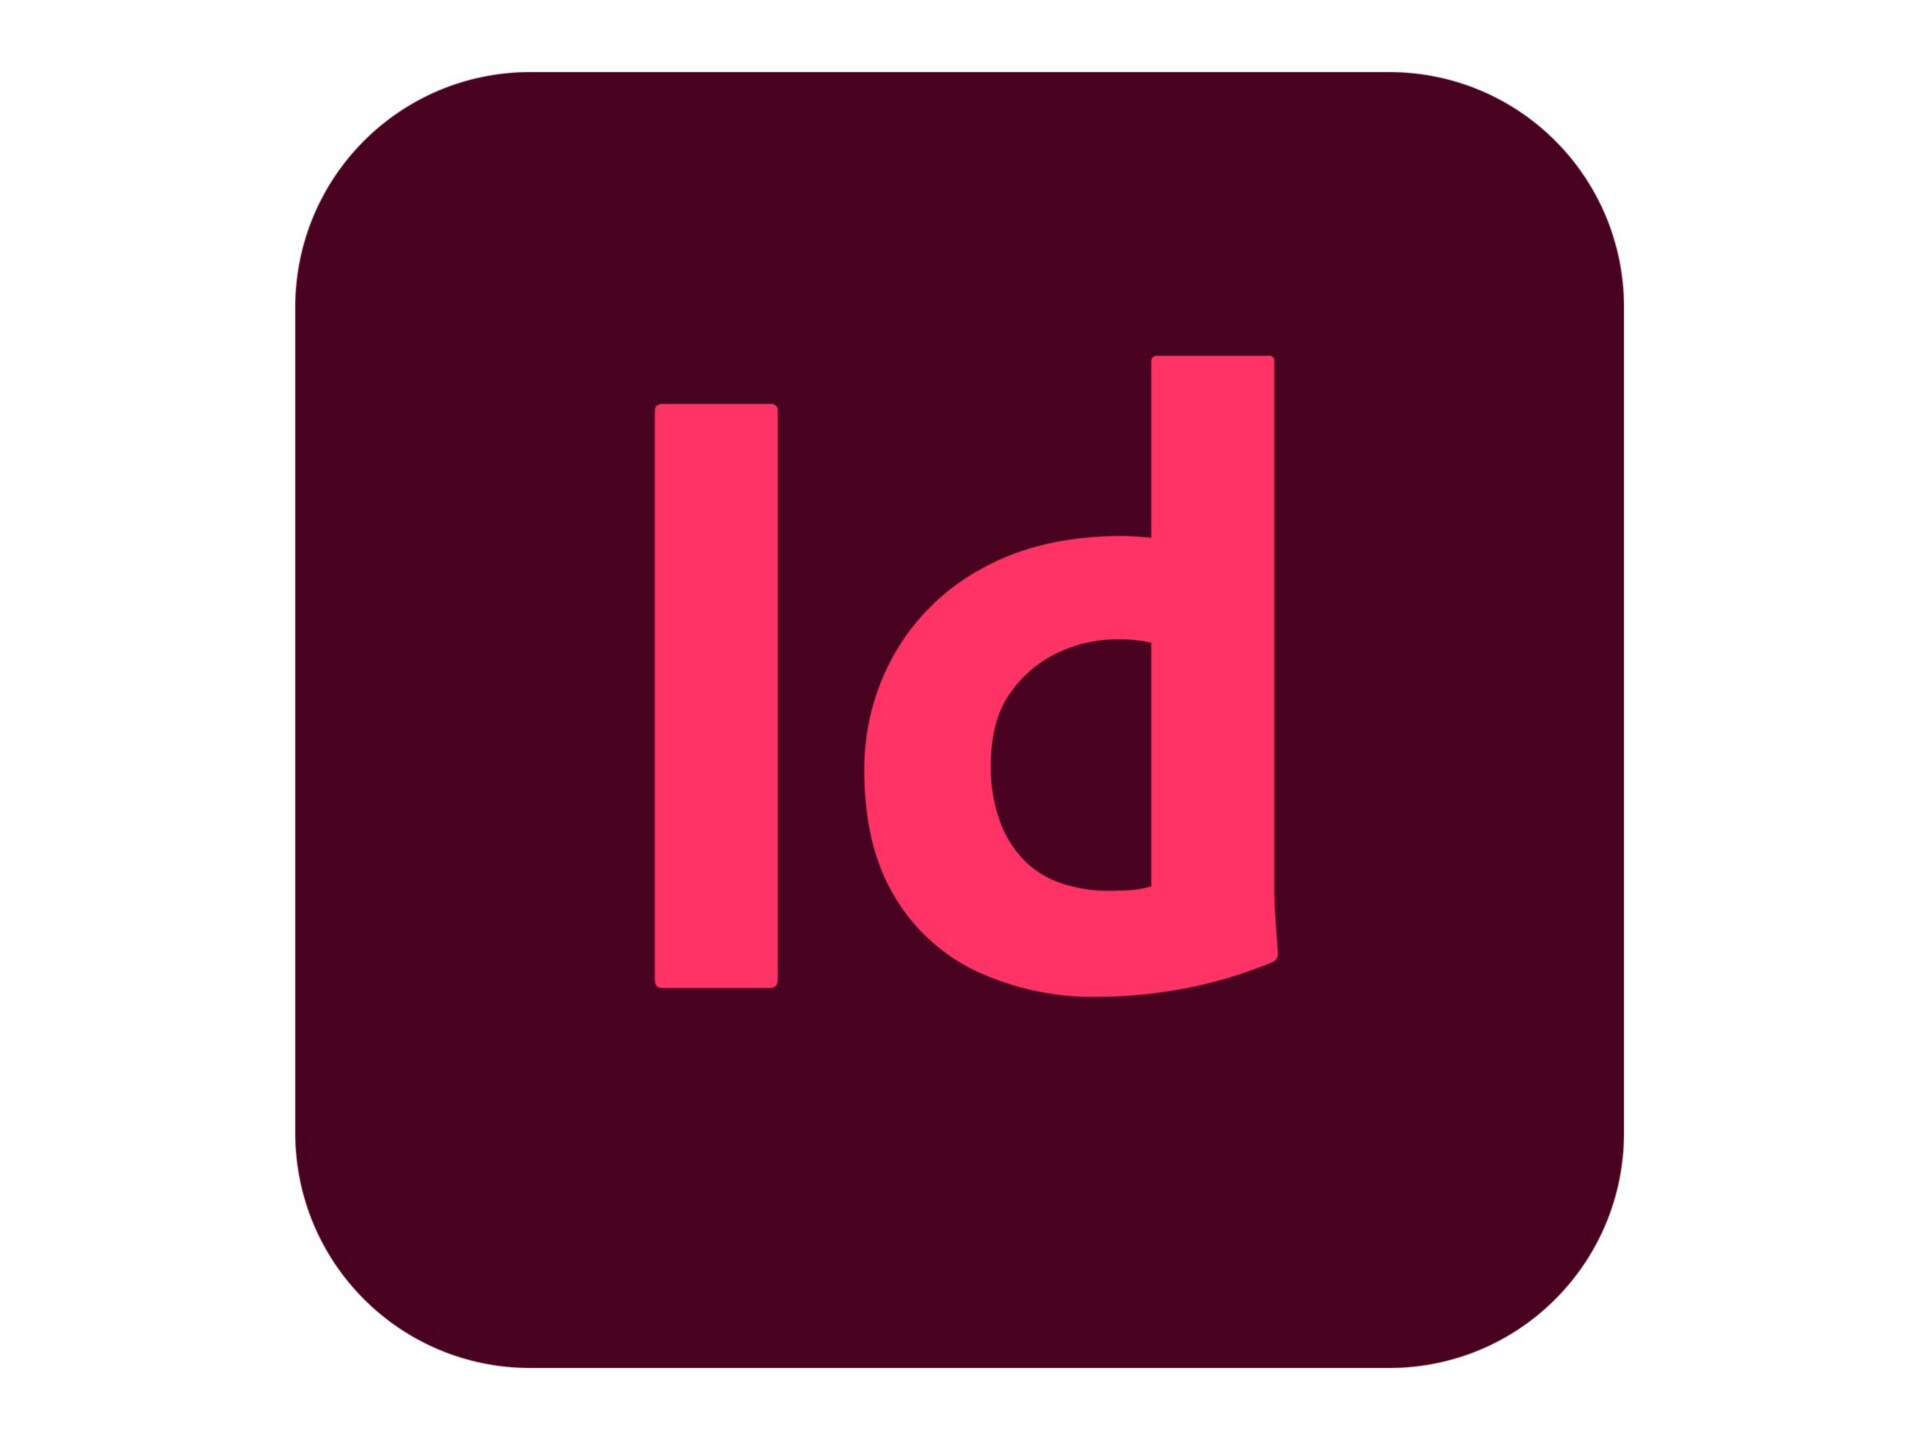 Adobe InDesign CC for teams - Subscription New (25 months) - 1 named user